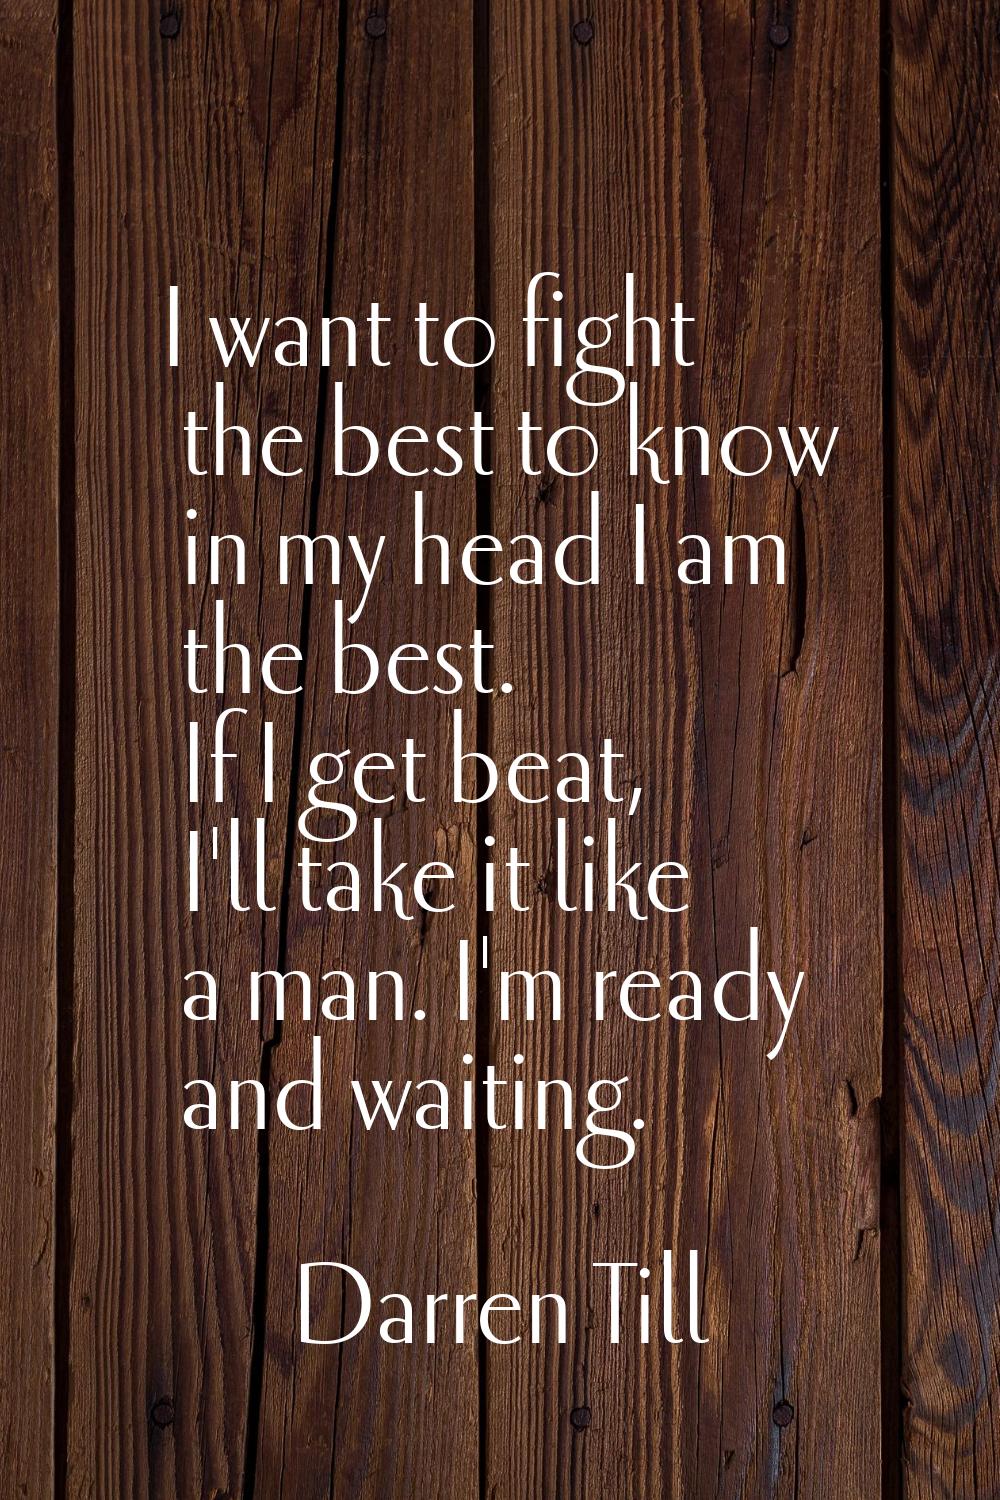 I want to fight the best to know in my head I am the best. If I get beat, I'll take it like a man. 